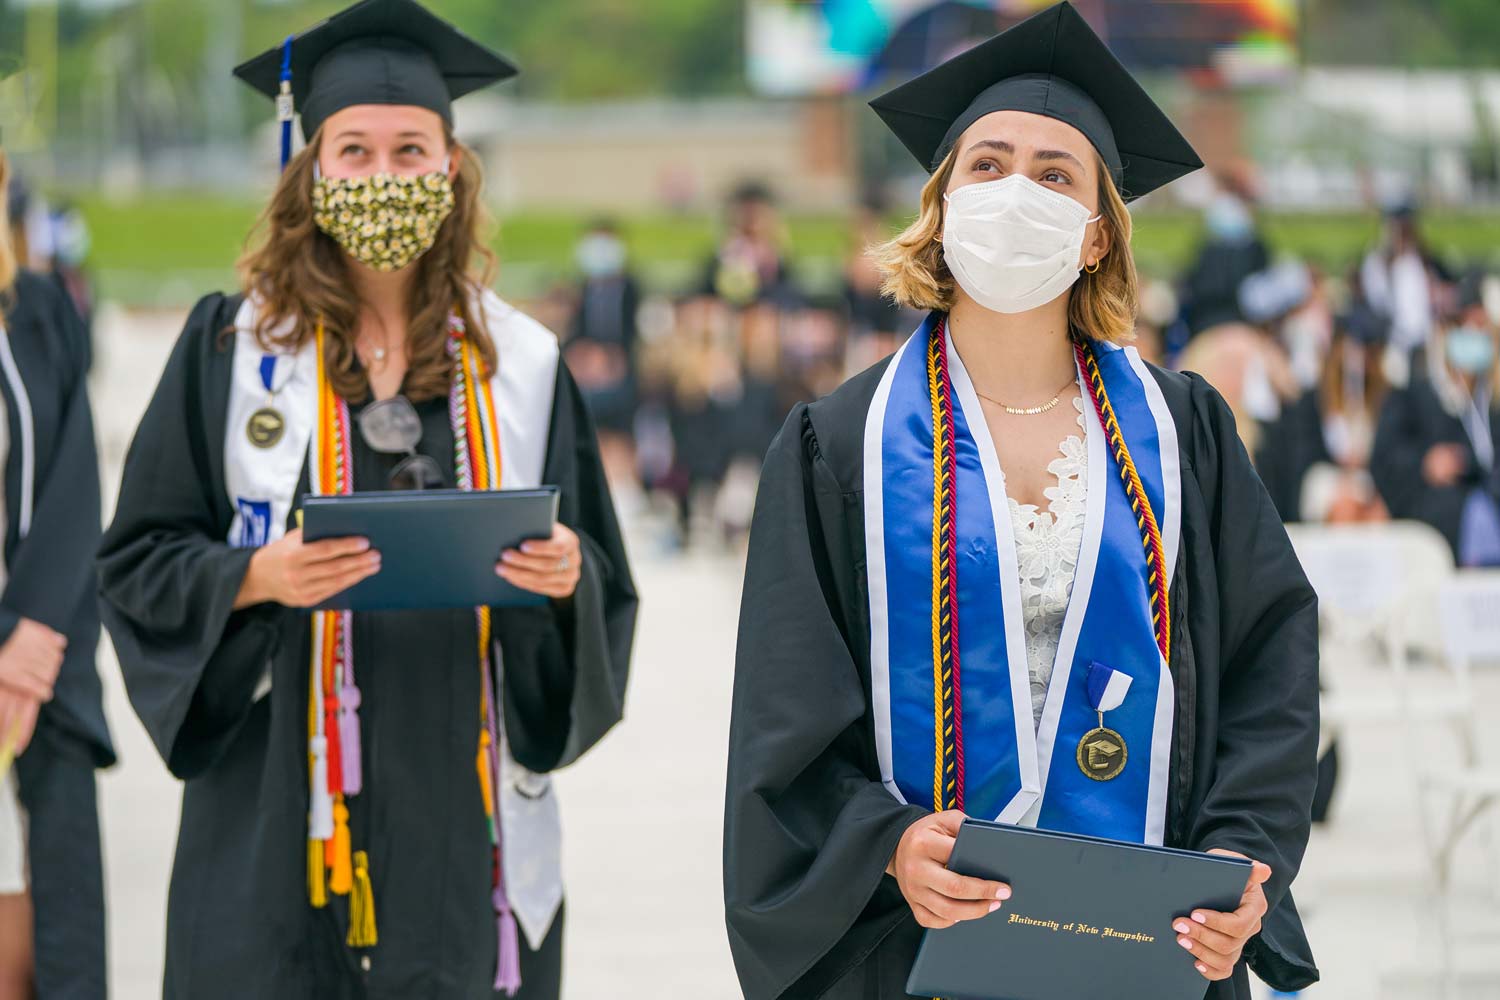 Two students in caps and gowns walk by with their diplomas in hardcover booklets